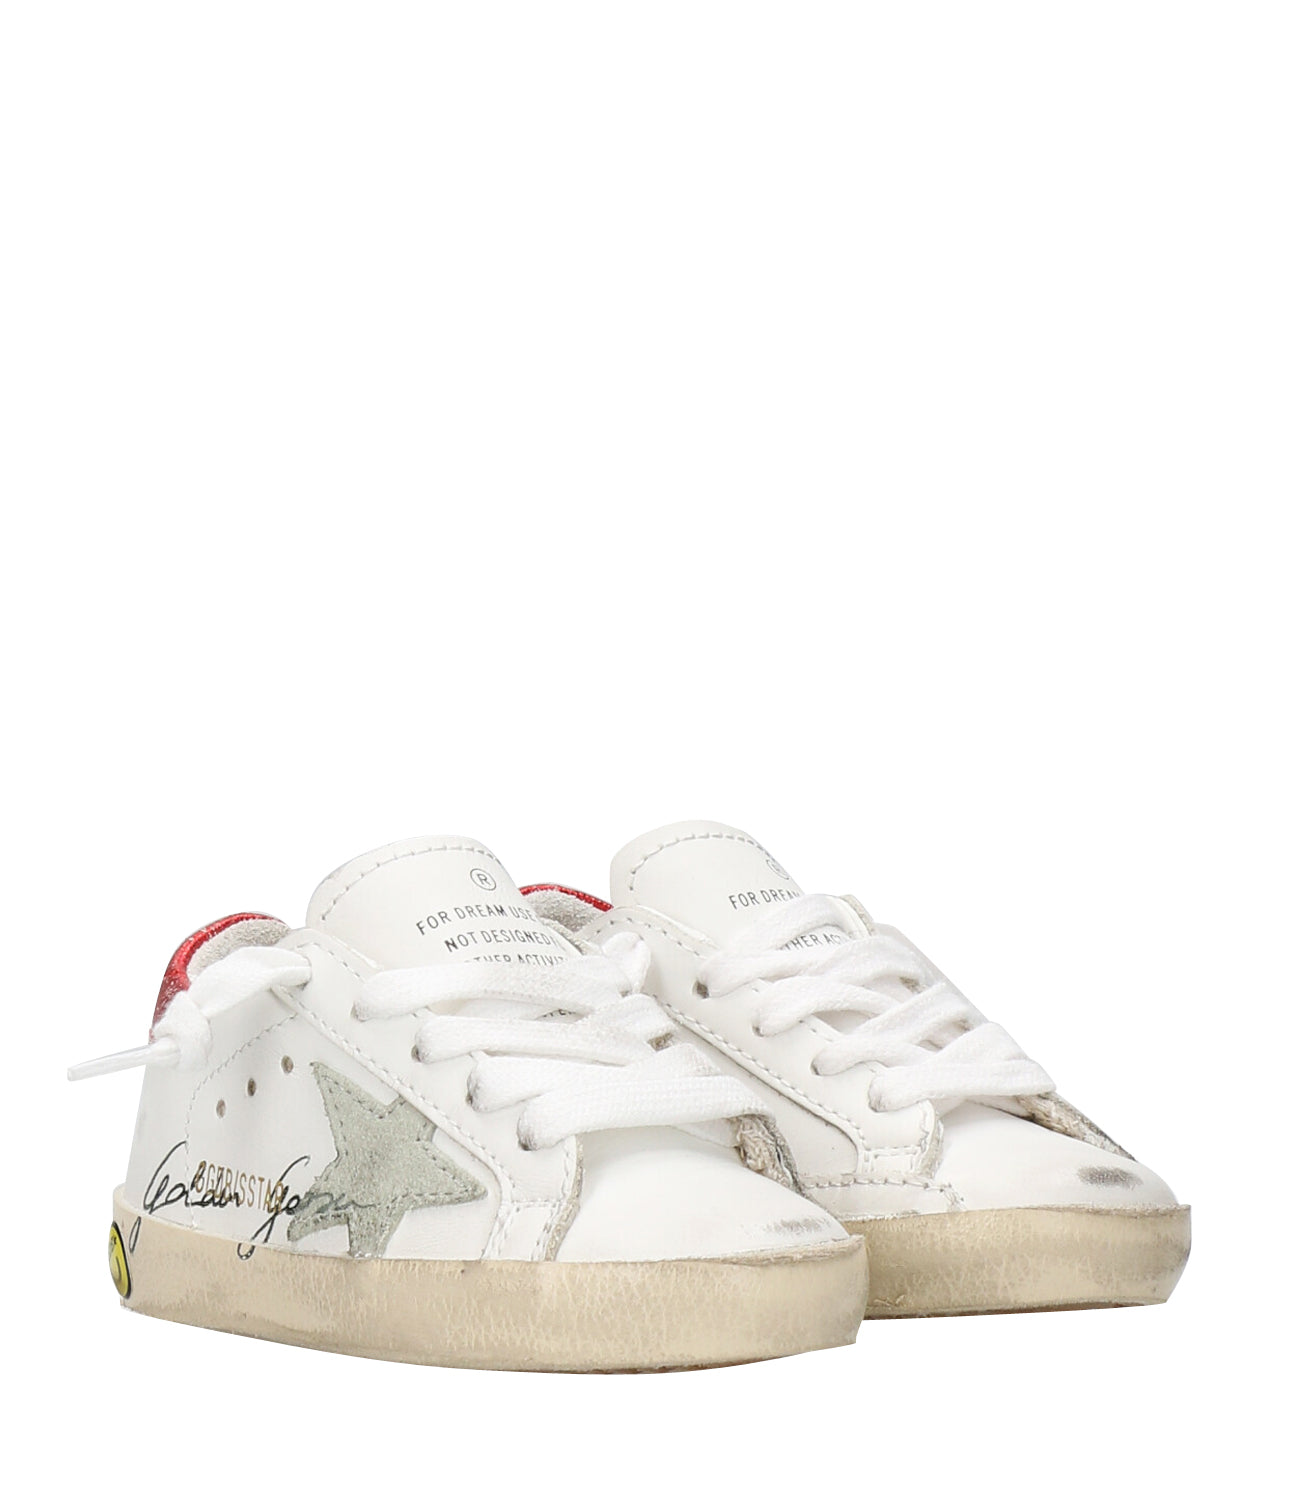 Golden Goose | Superstar Sneakers White, Red and Silver